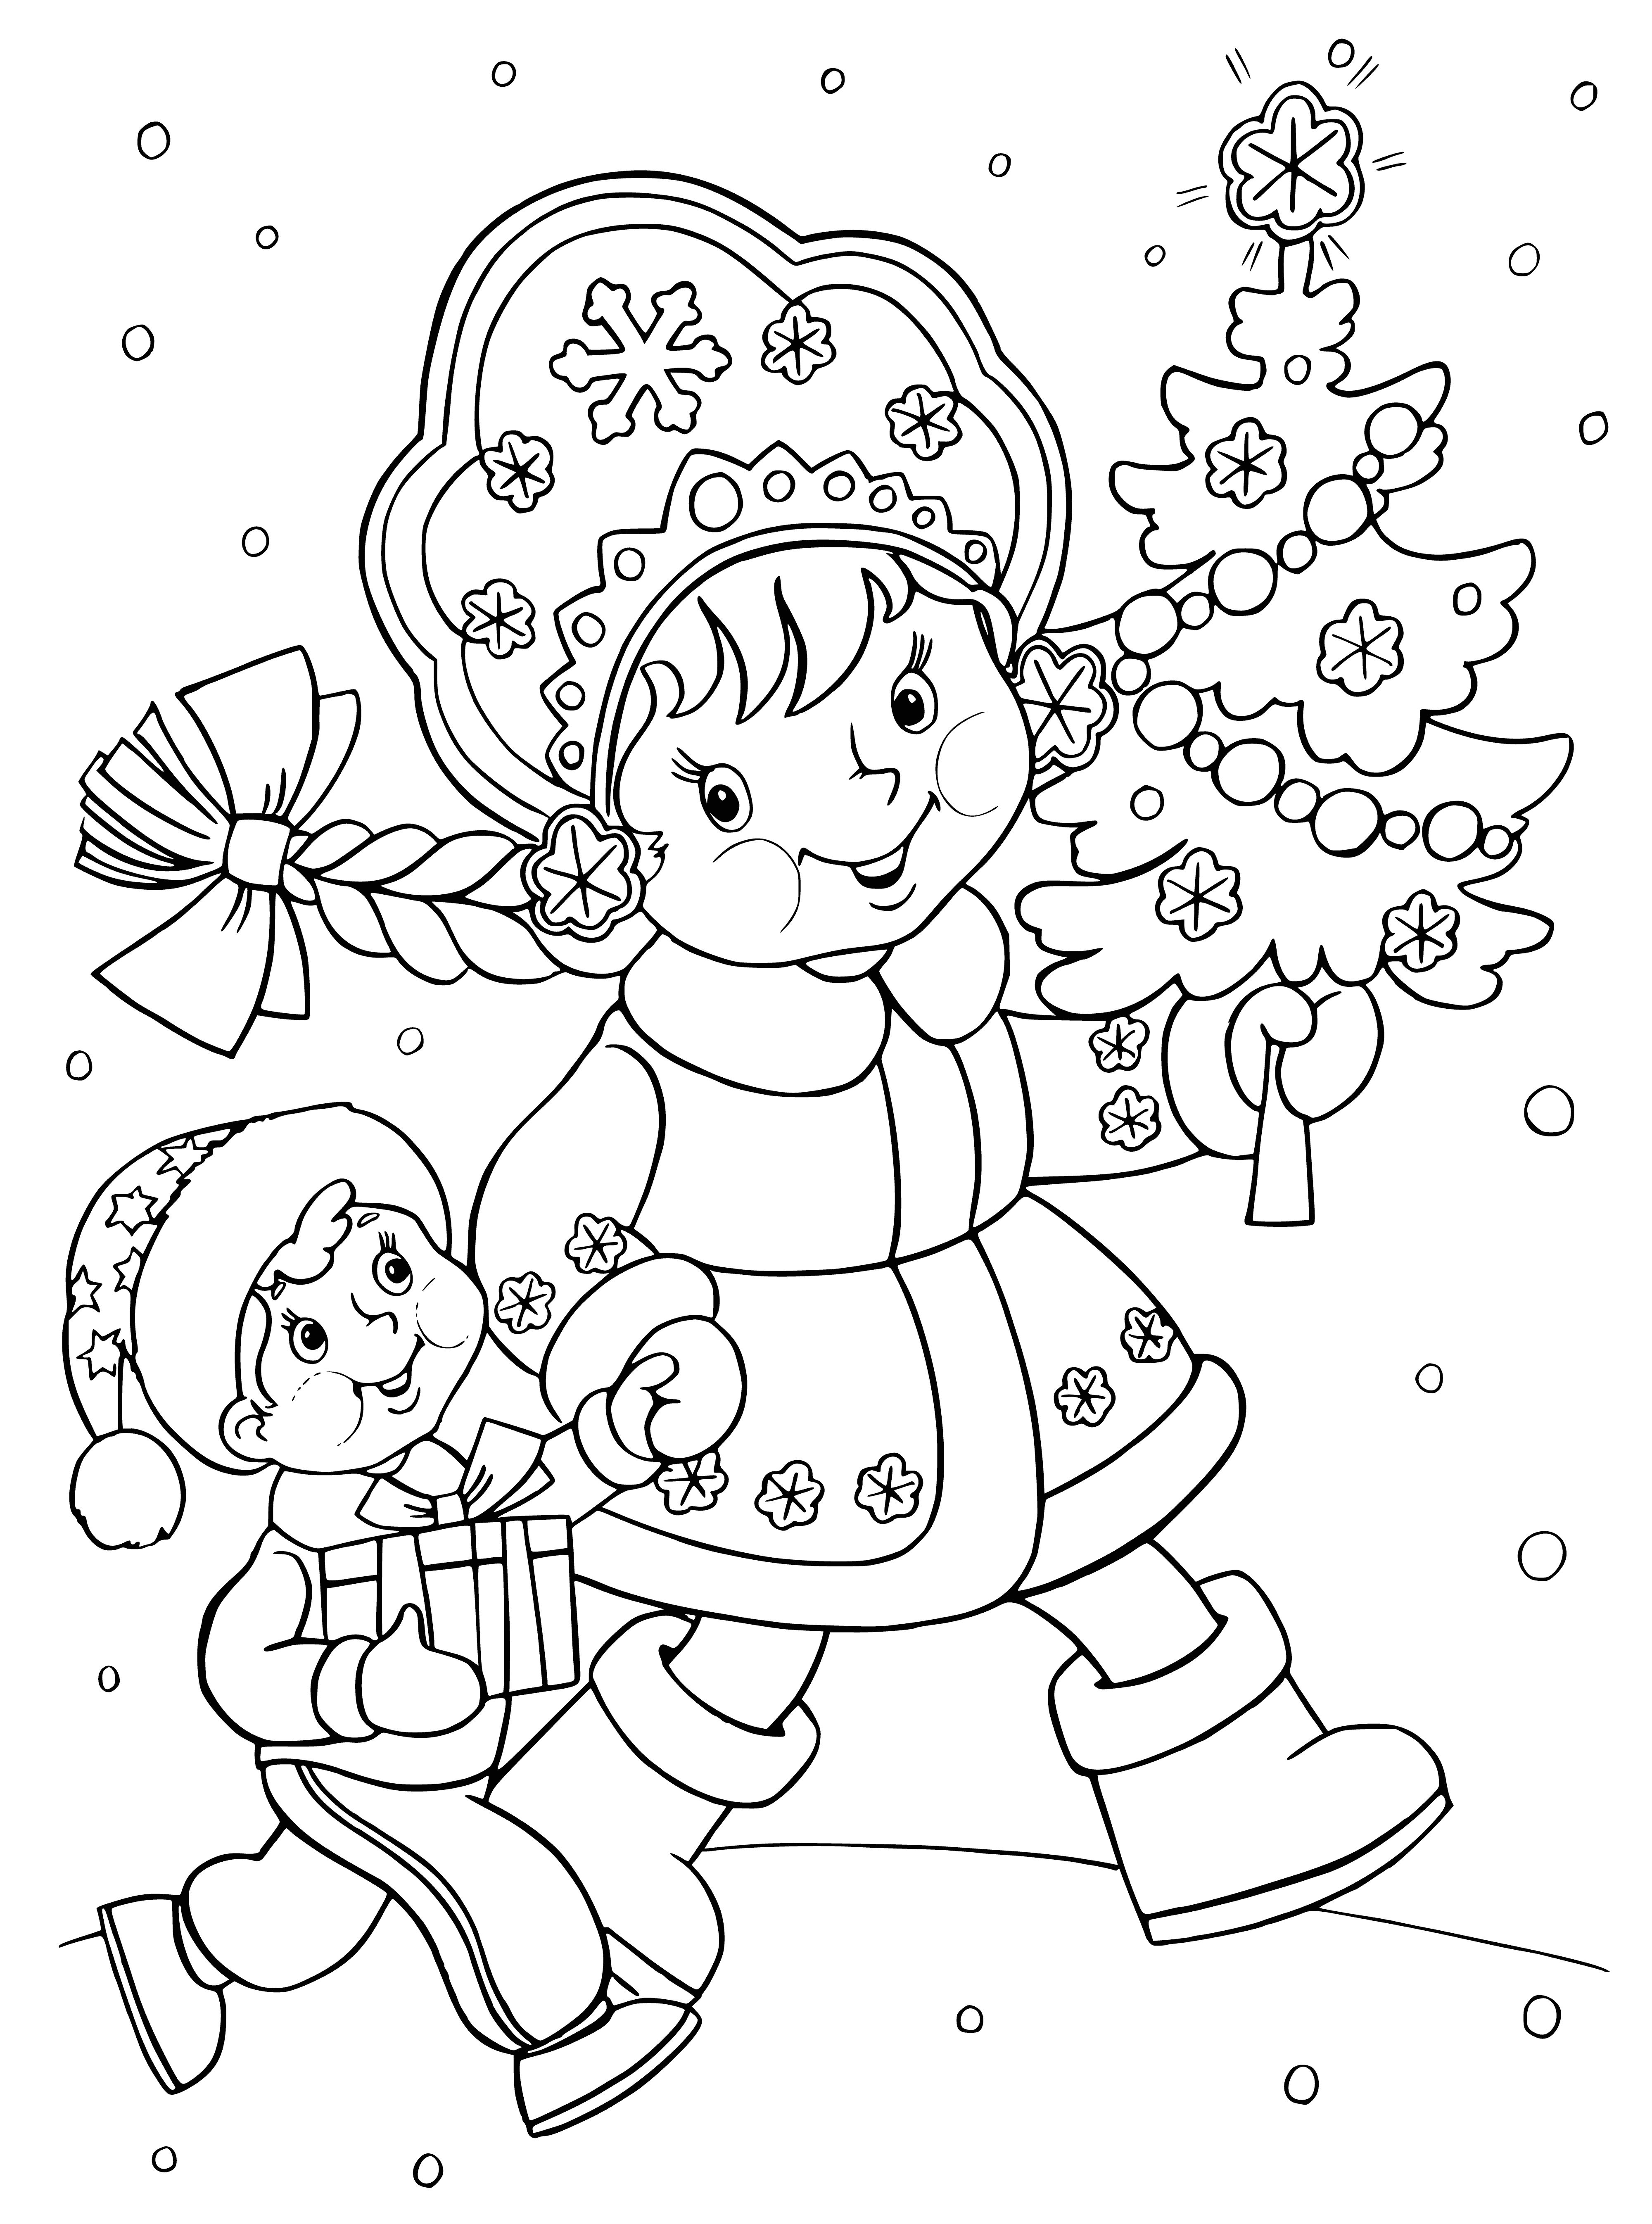 coloring page: Snow Maiden holds gifts and decorates a tree - a beautiful coloring page w/ white dress, blue sash/scarf, fur cape, holly, ornaments, lights, star.